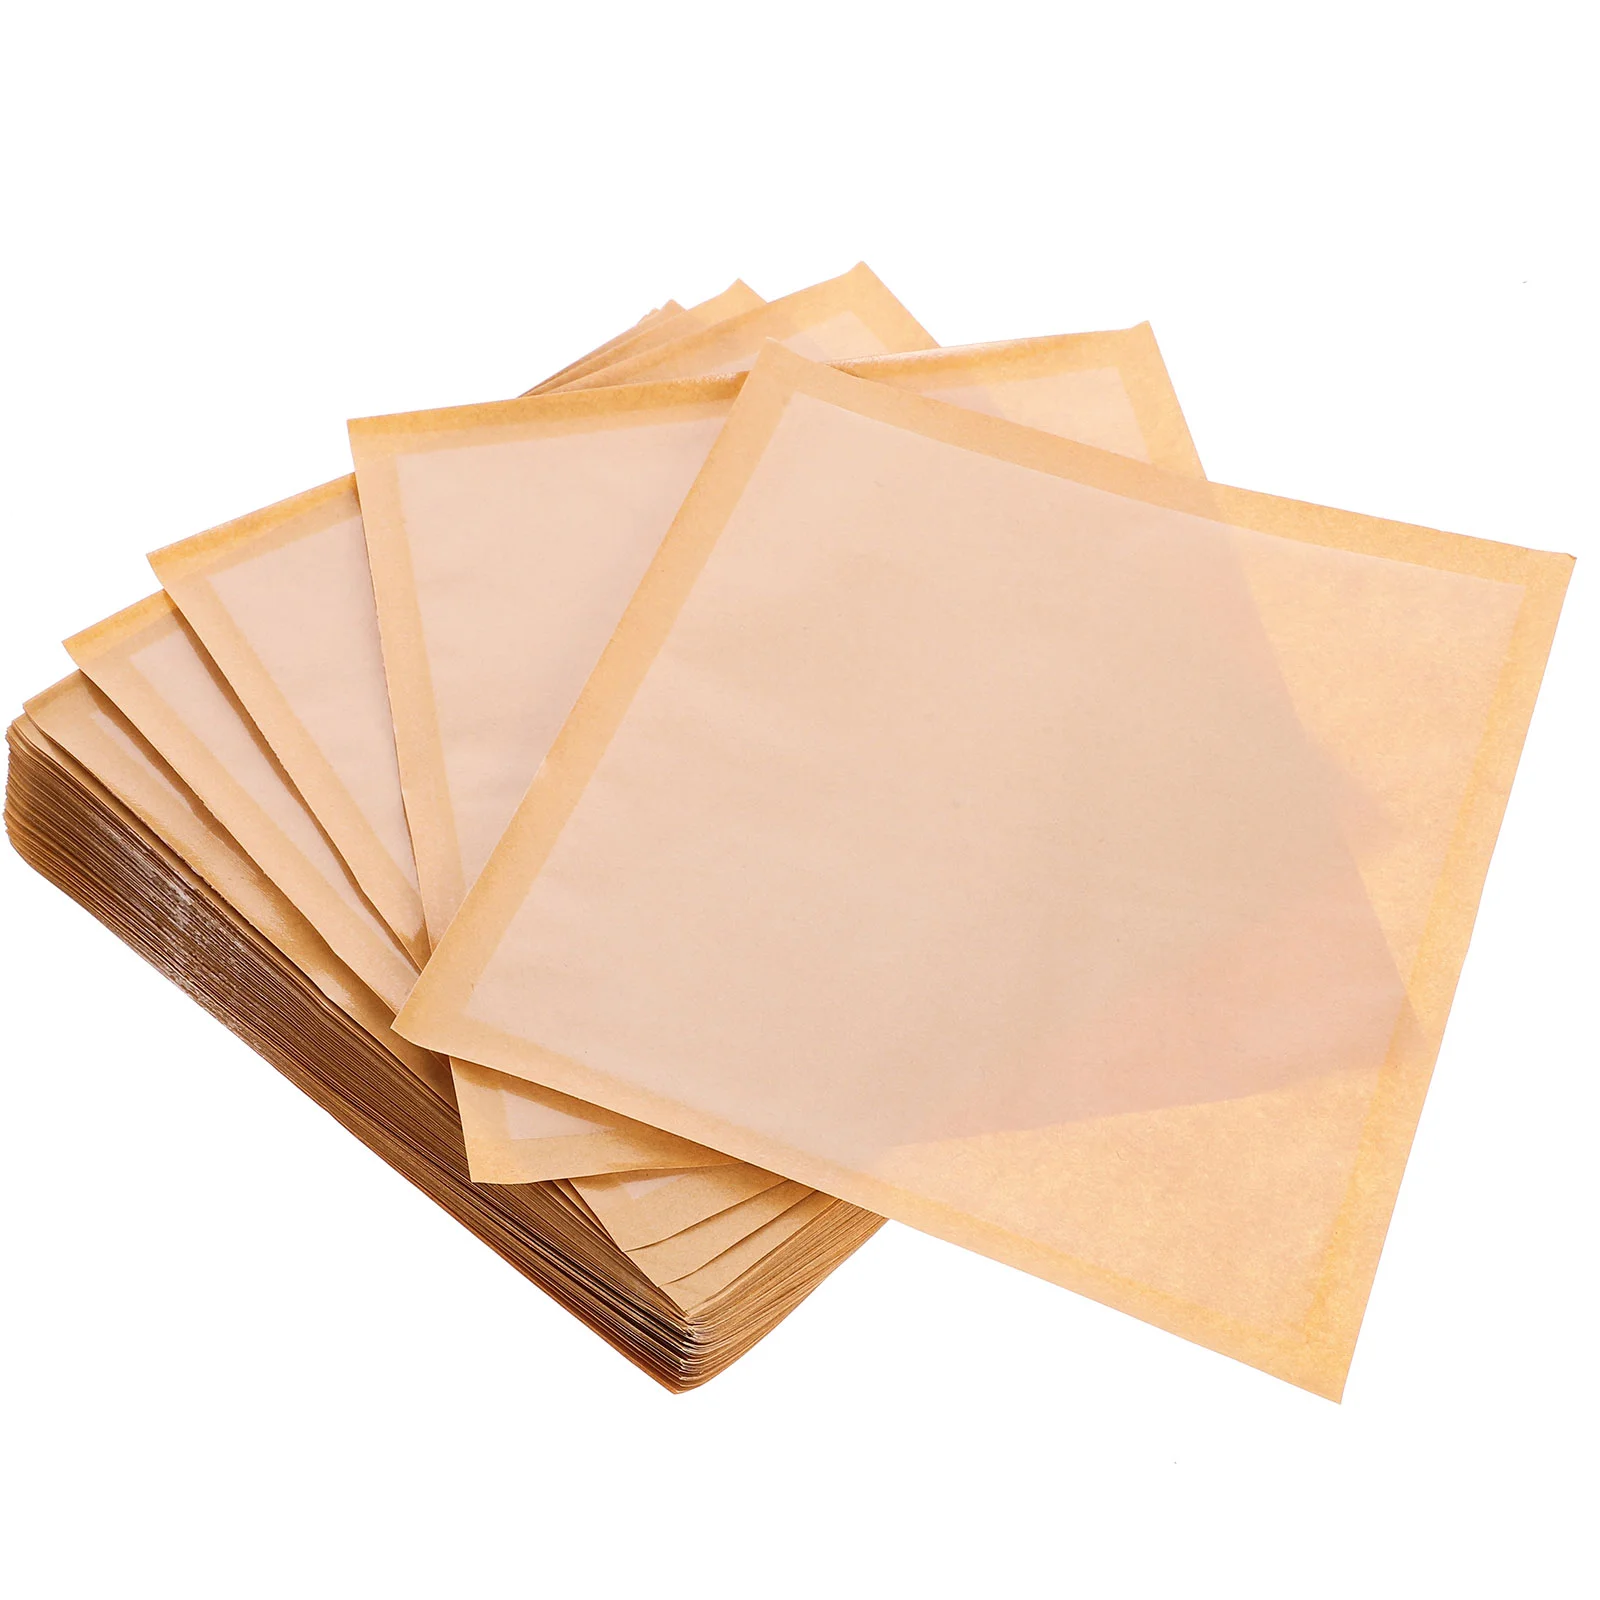 

100 Pcs Donuts Household Bread Bag Sandwich Bags Window Kraft Paper Cowhide Clear Baking Toast Wrapping Pouches